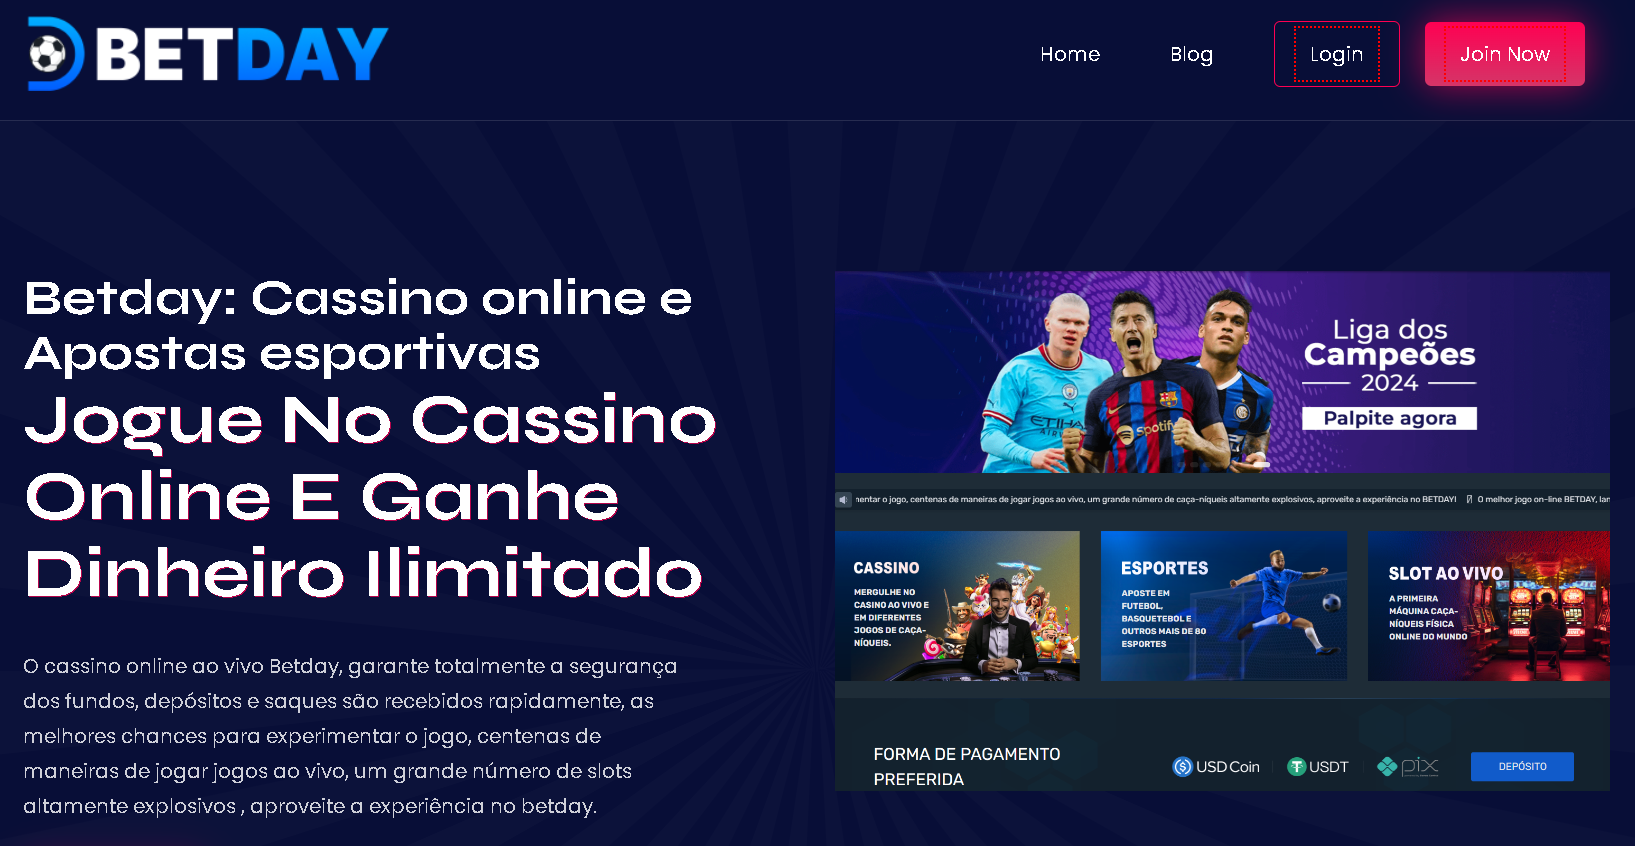 How to Get Started with Betday Casino Online